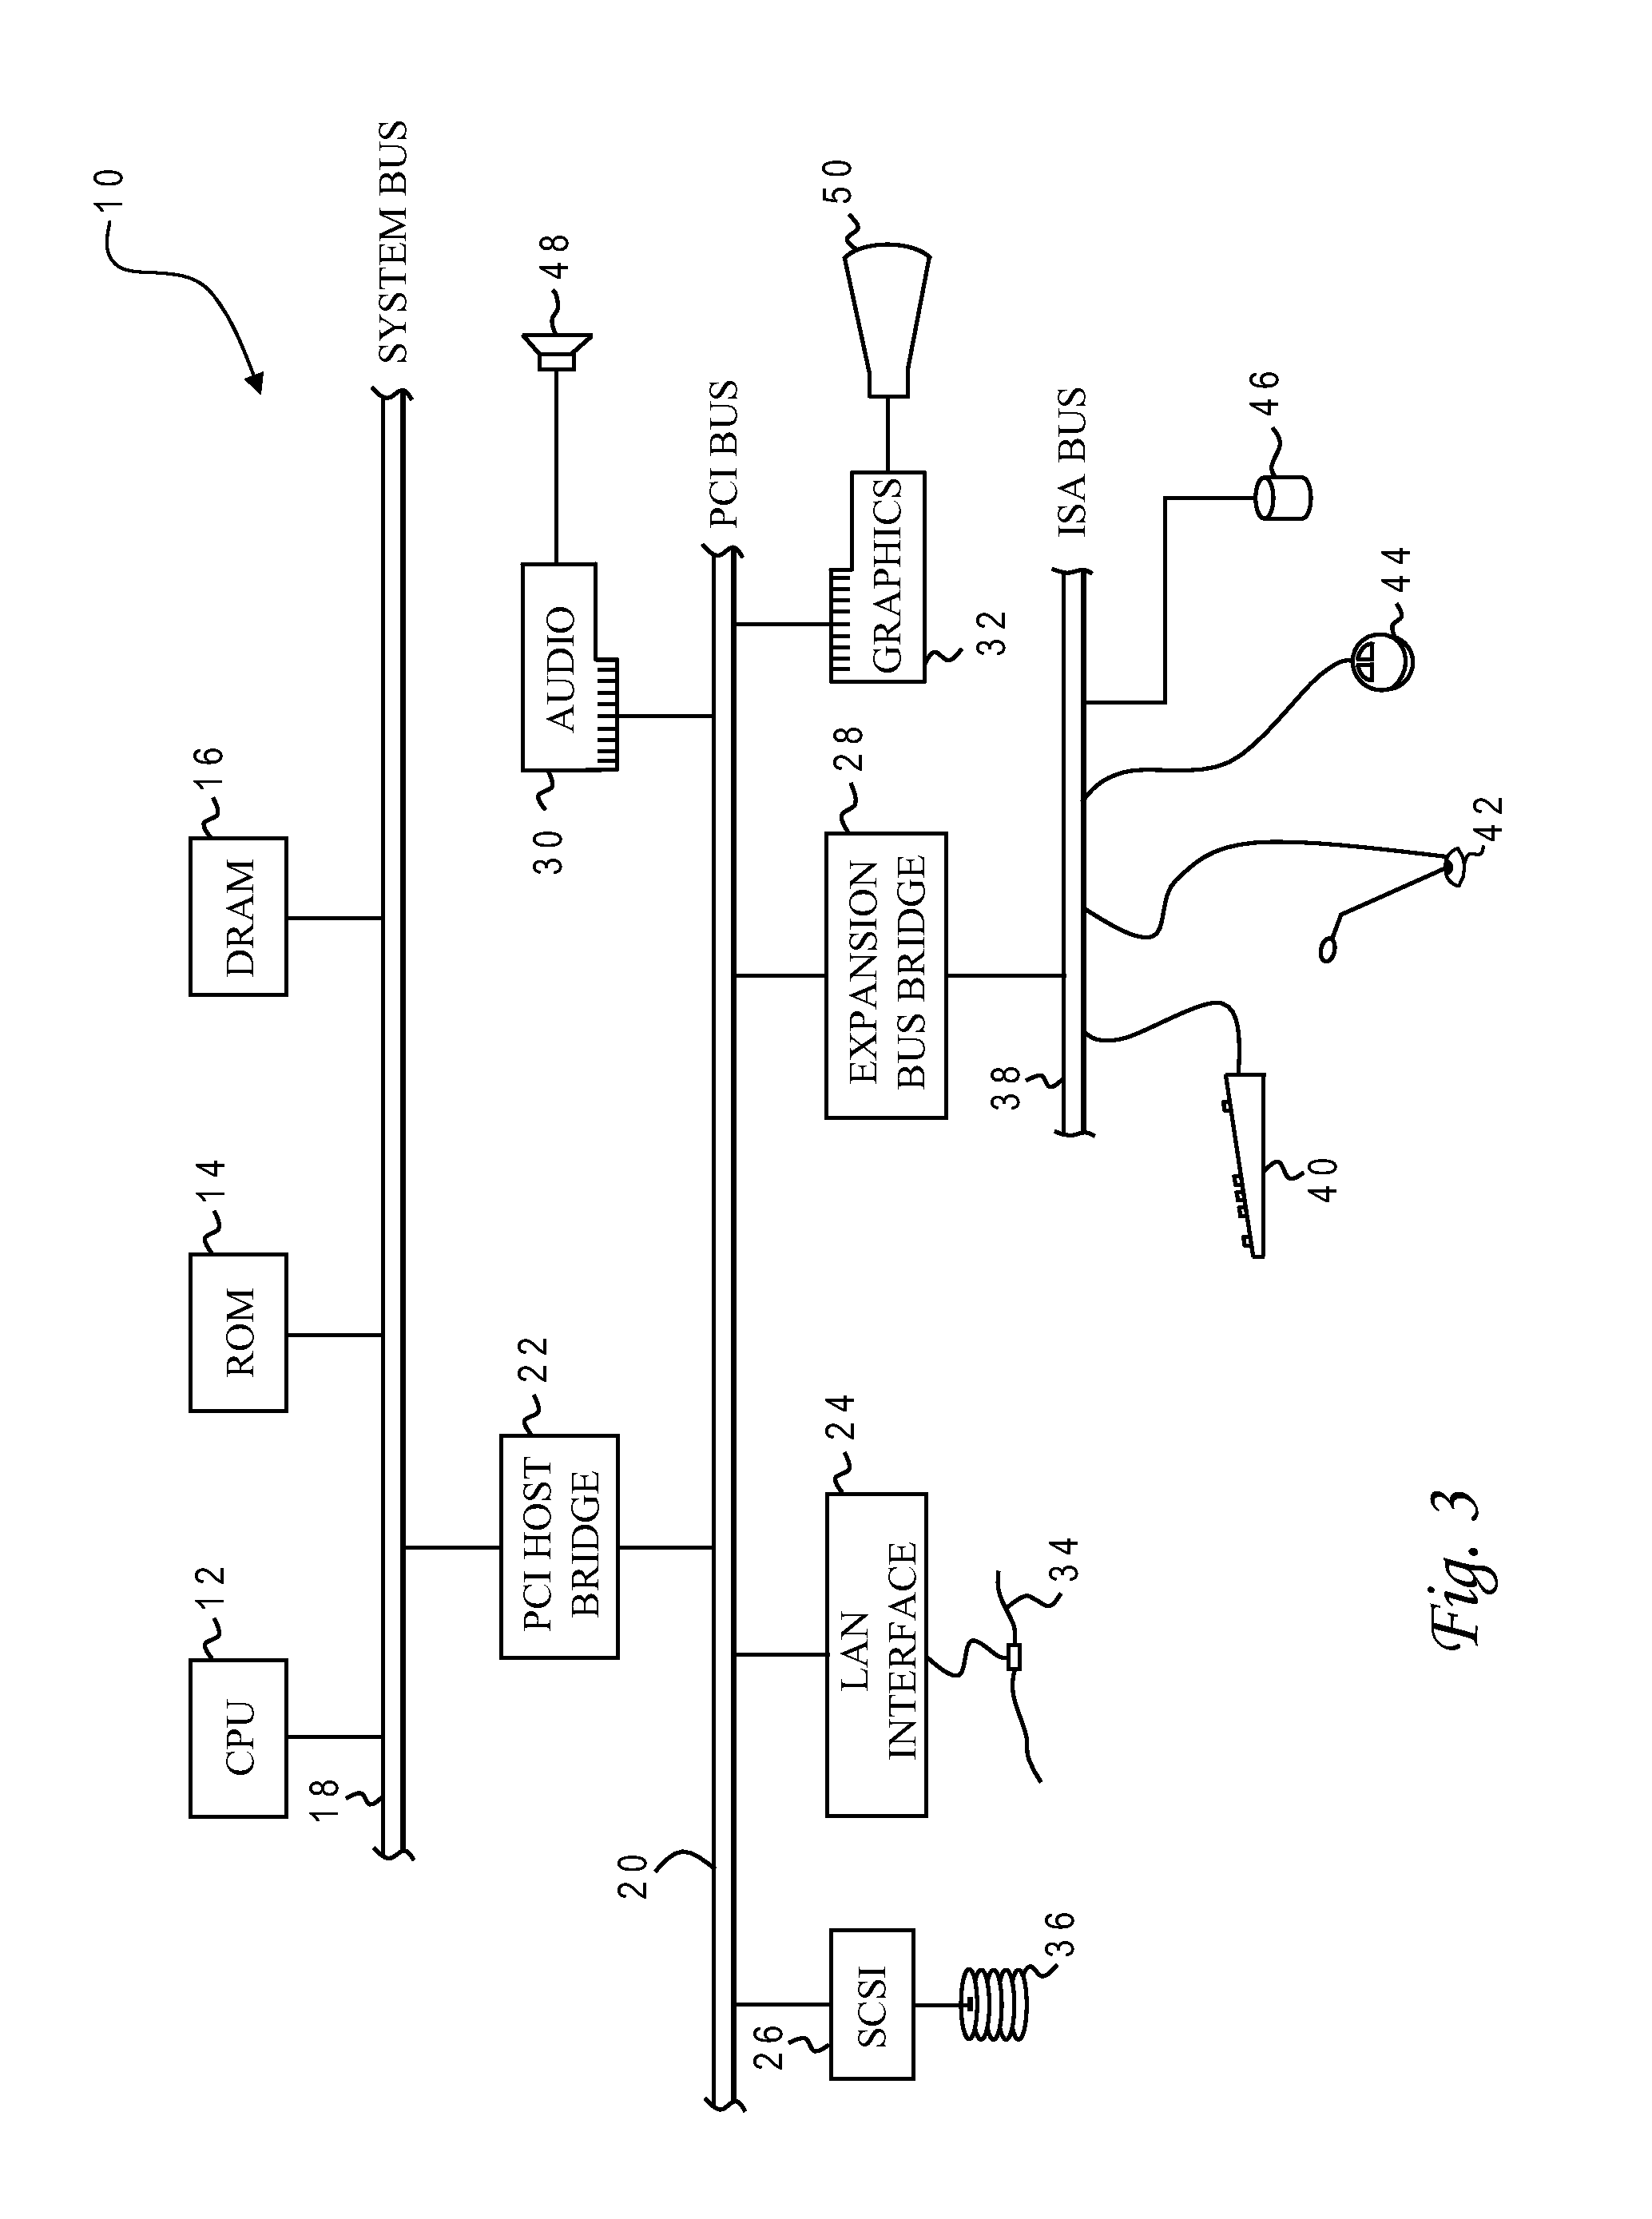 Method for Radiation Tolerance by Implant Well Notching